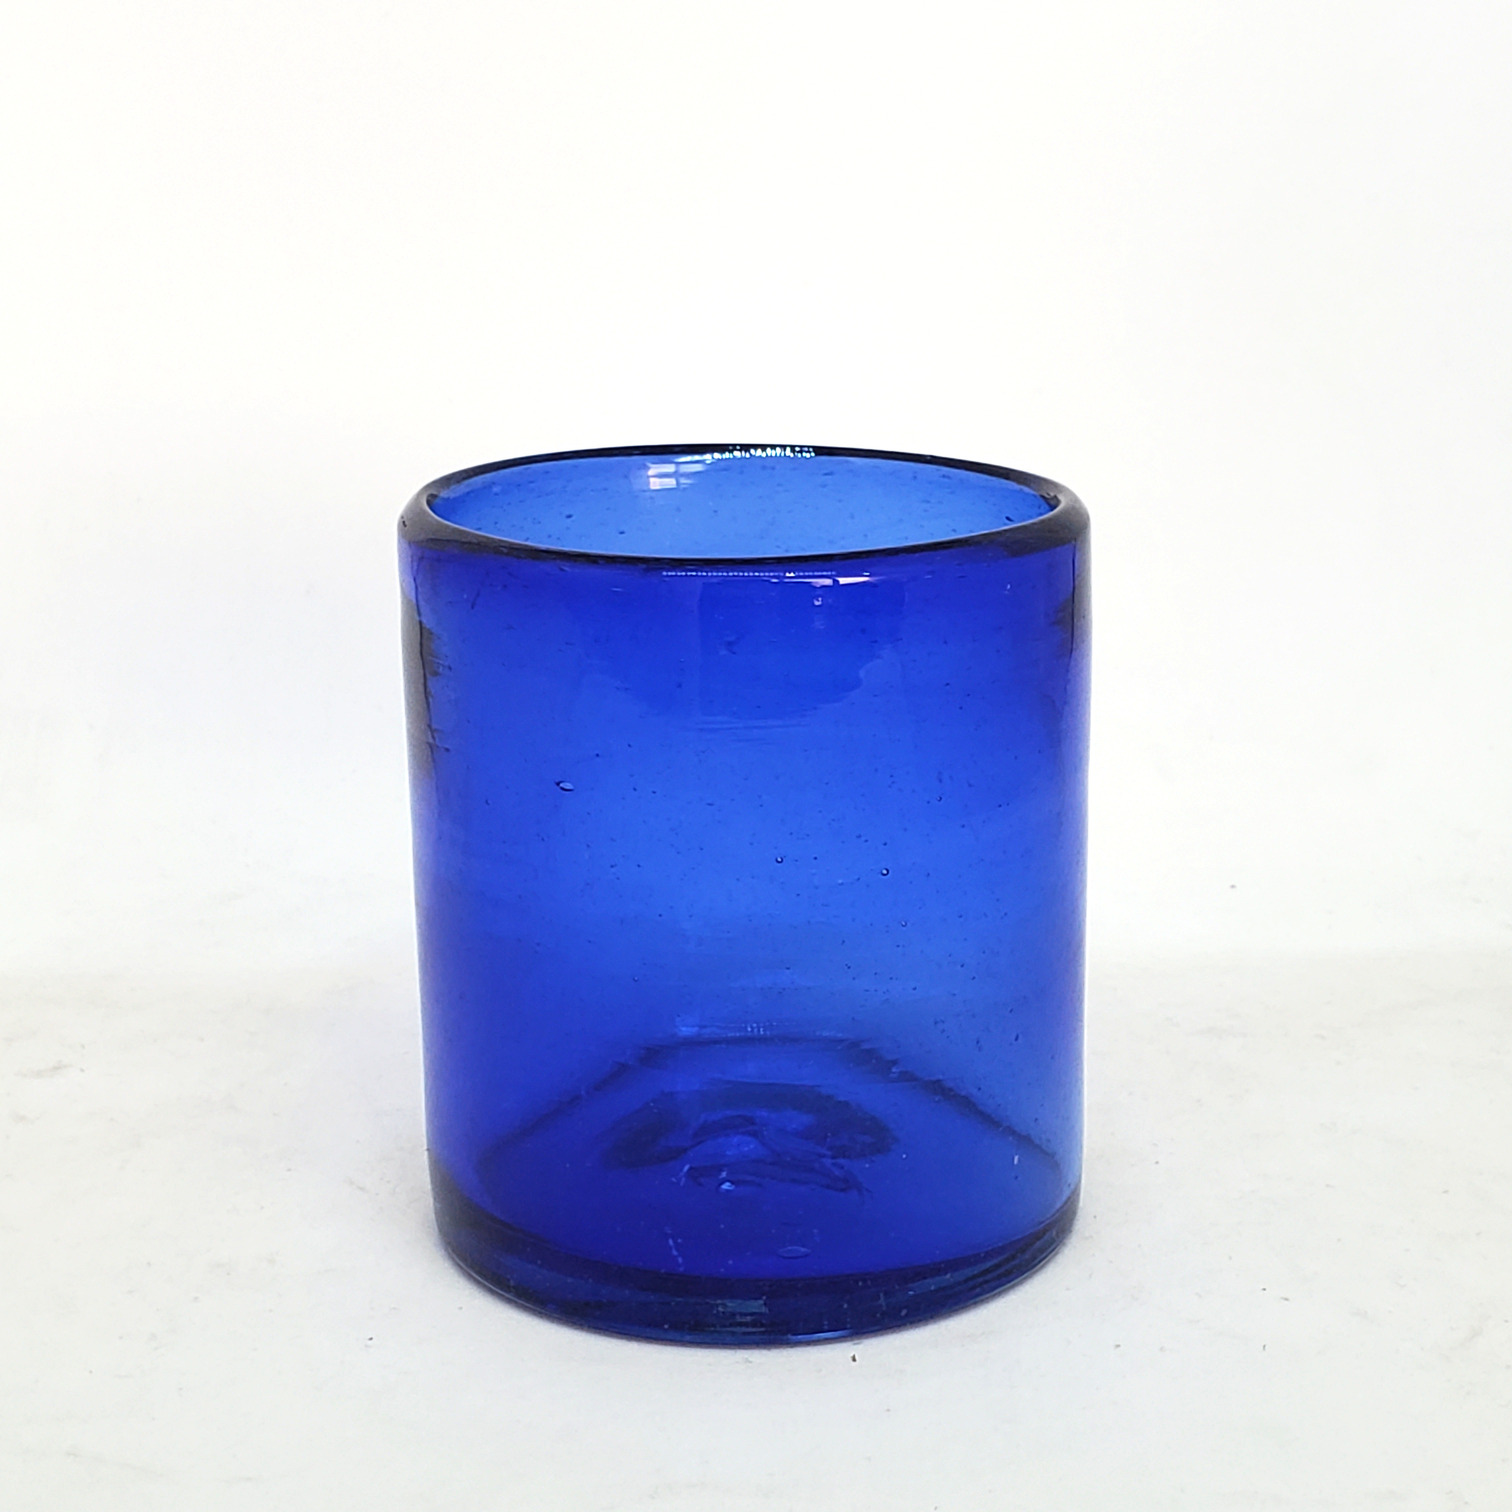 New Items / Solid Cobalt Blue 9 oz Short Tumblers (set of 6) / Enhance your favorite drink with these colorful handcrafted glasses.